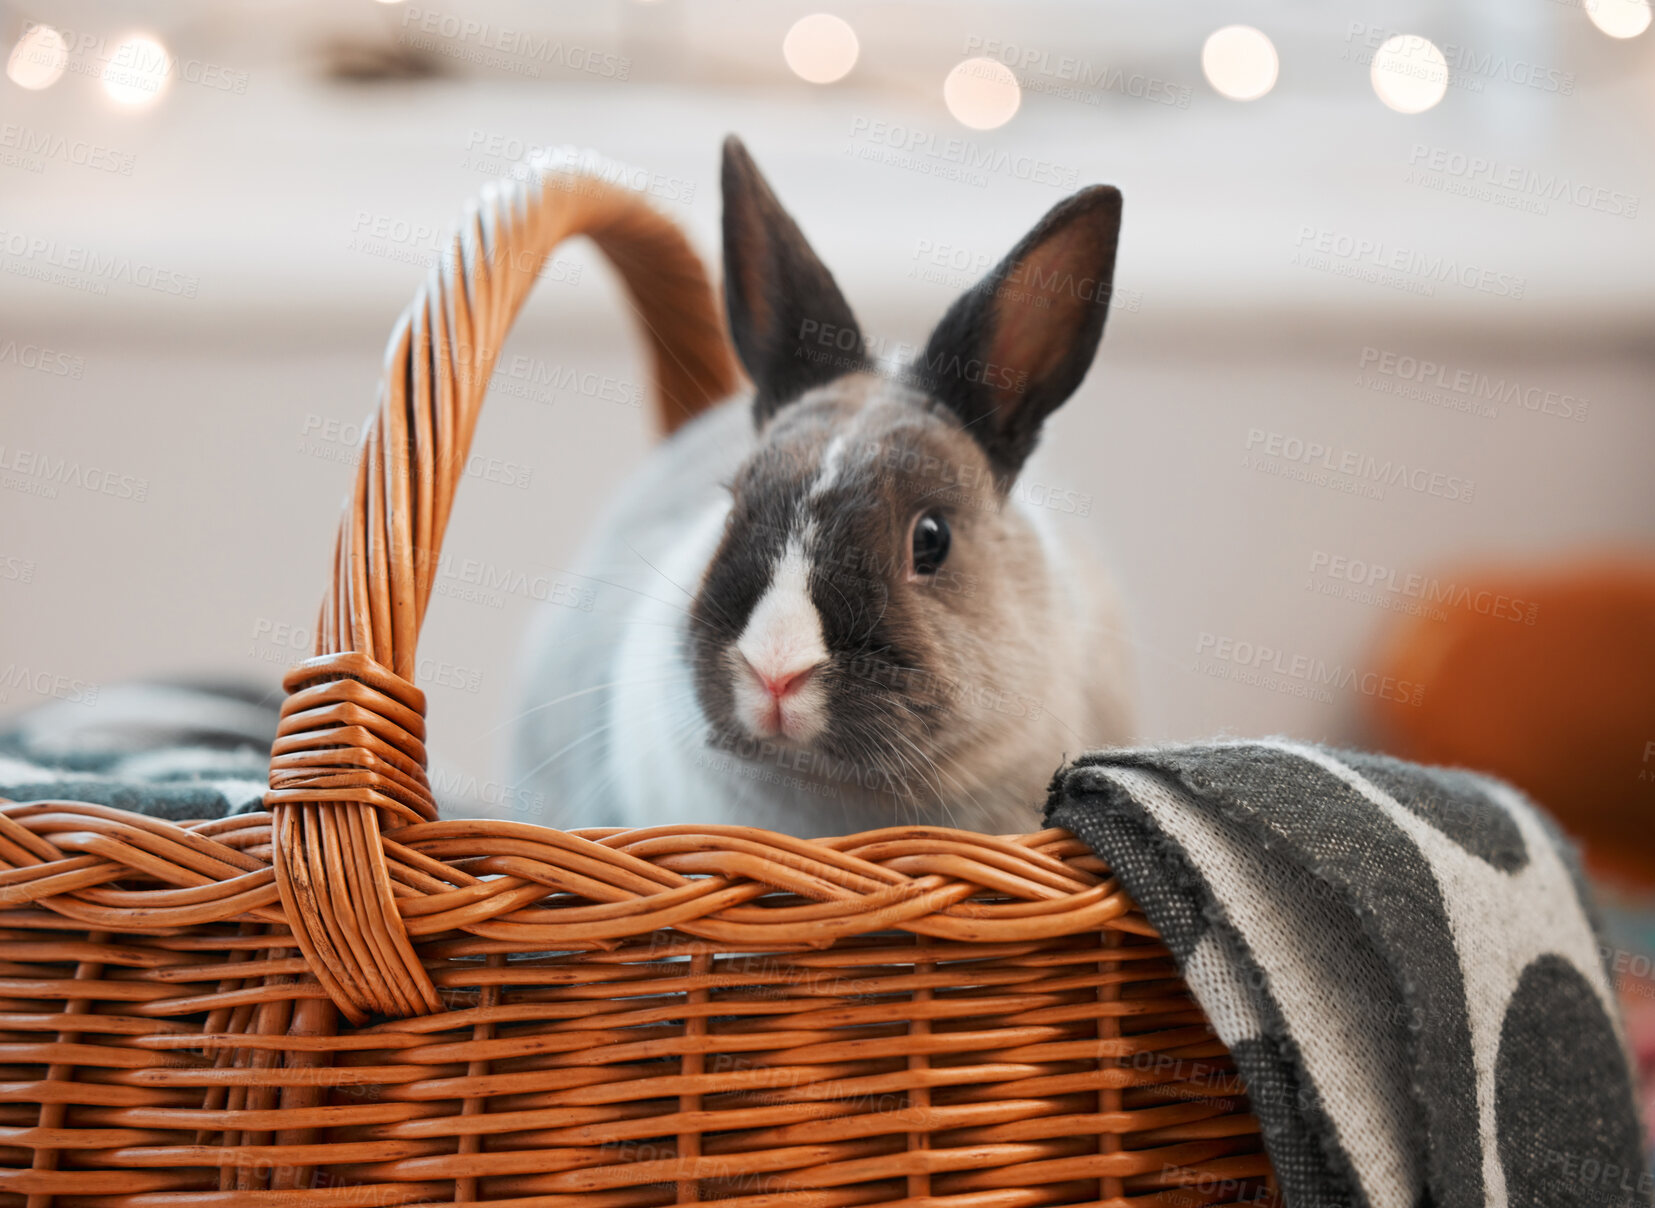 Buy stock photo Shot of an adorable rabbit sitting in it's basket at home